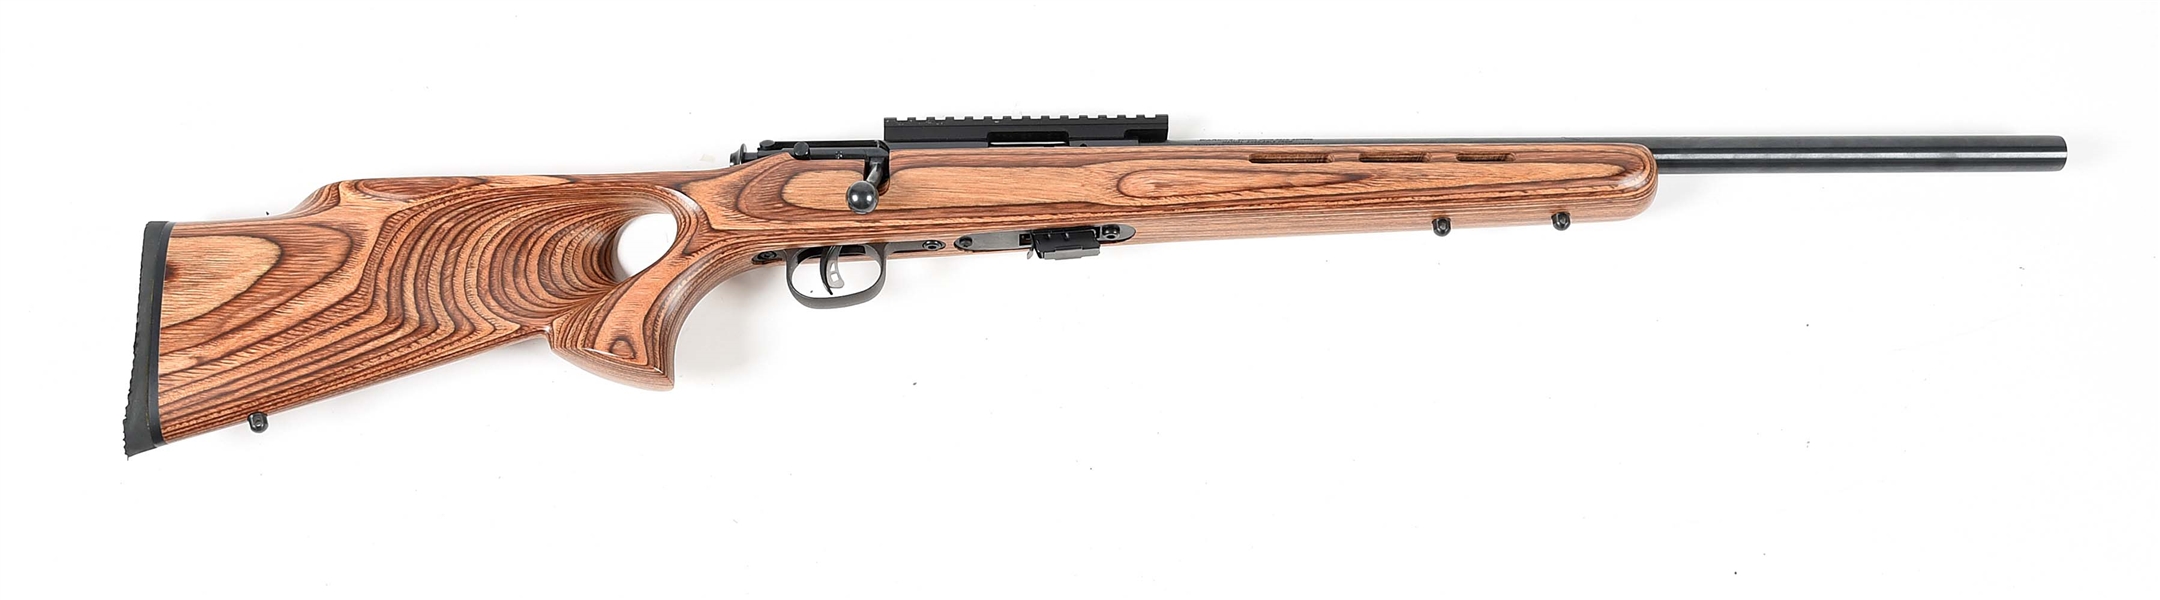 (M) SAVAGE MKII BTV .22 LR BOLT ACTION RIFLE WITH THUMB HOLE STOCK